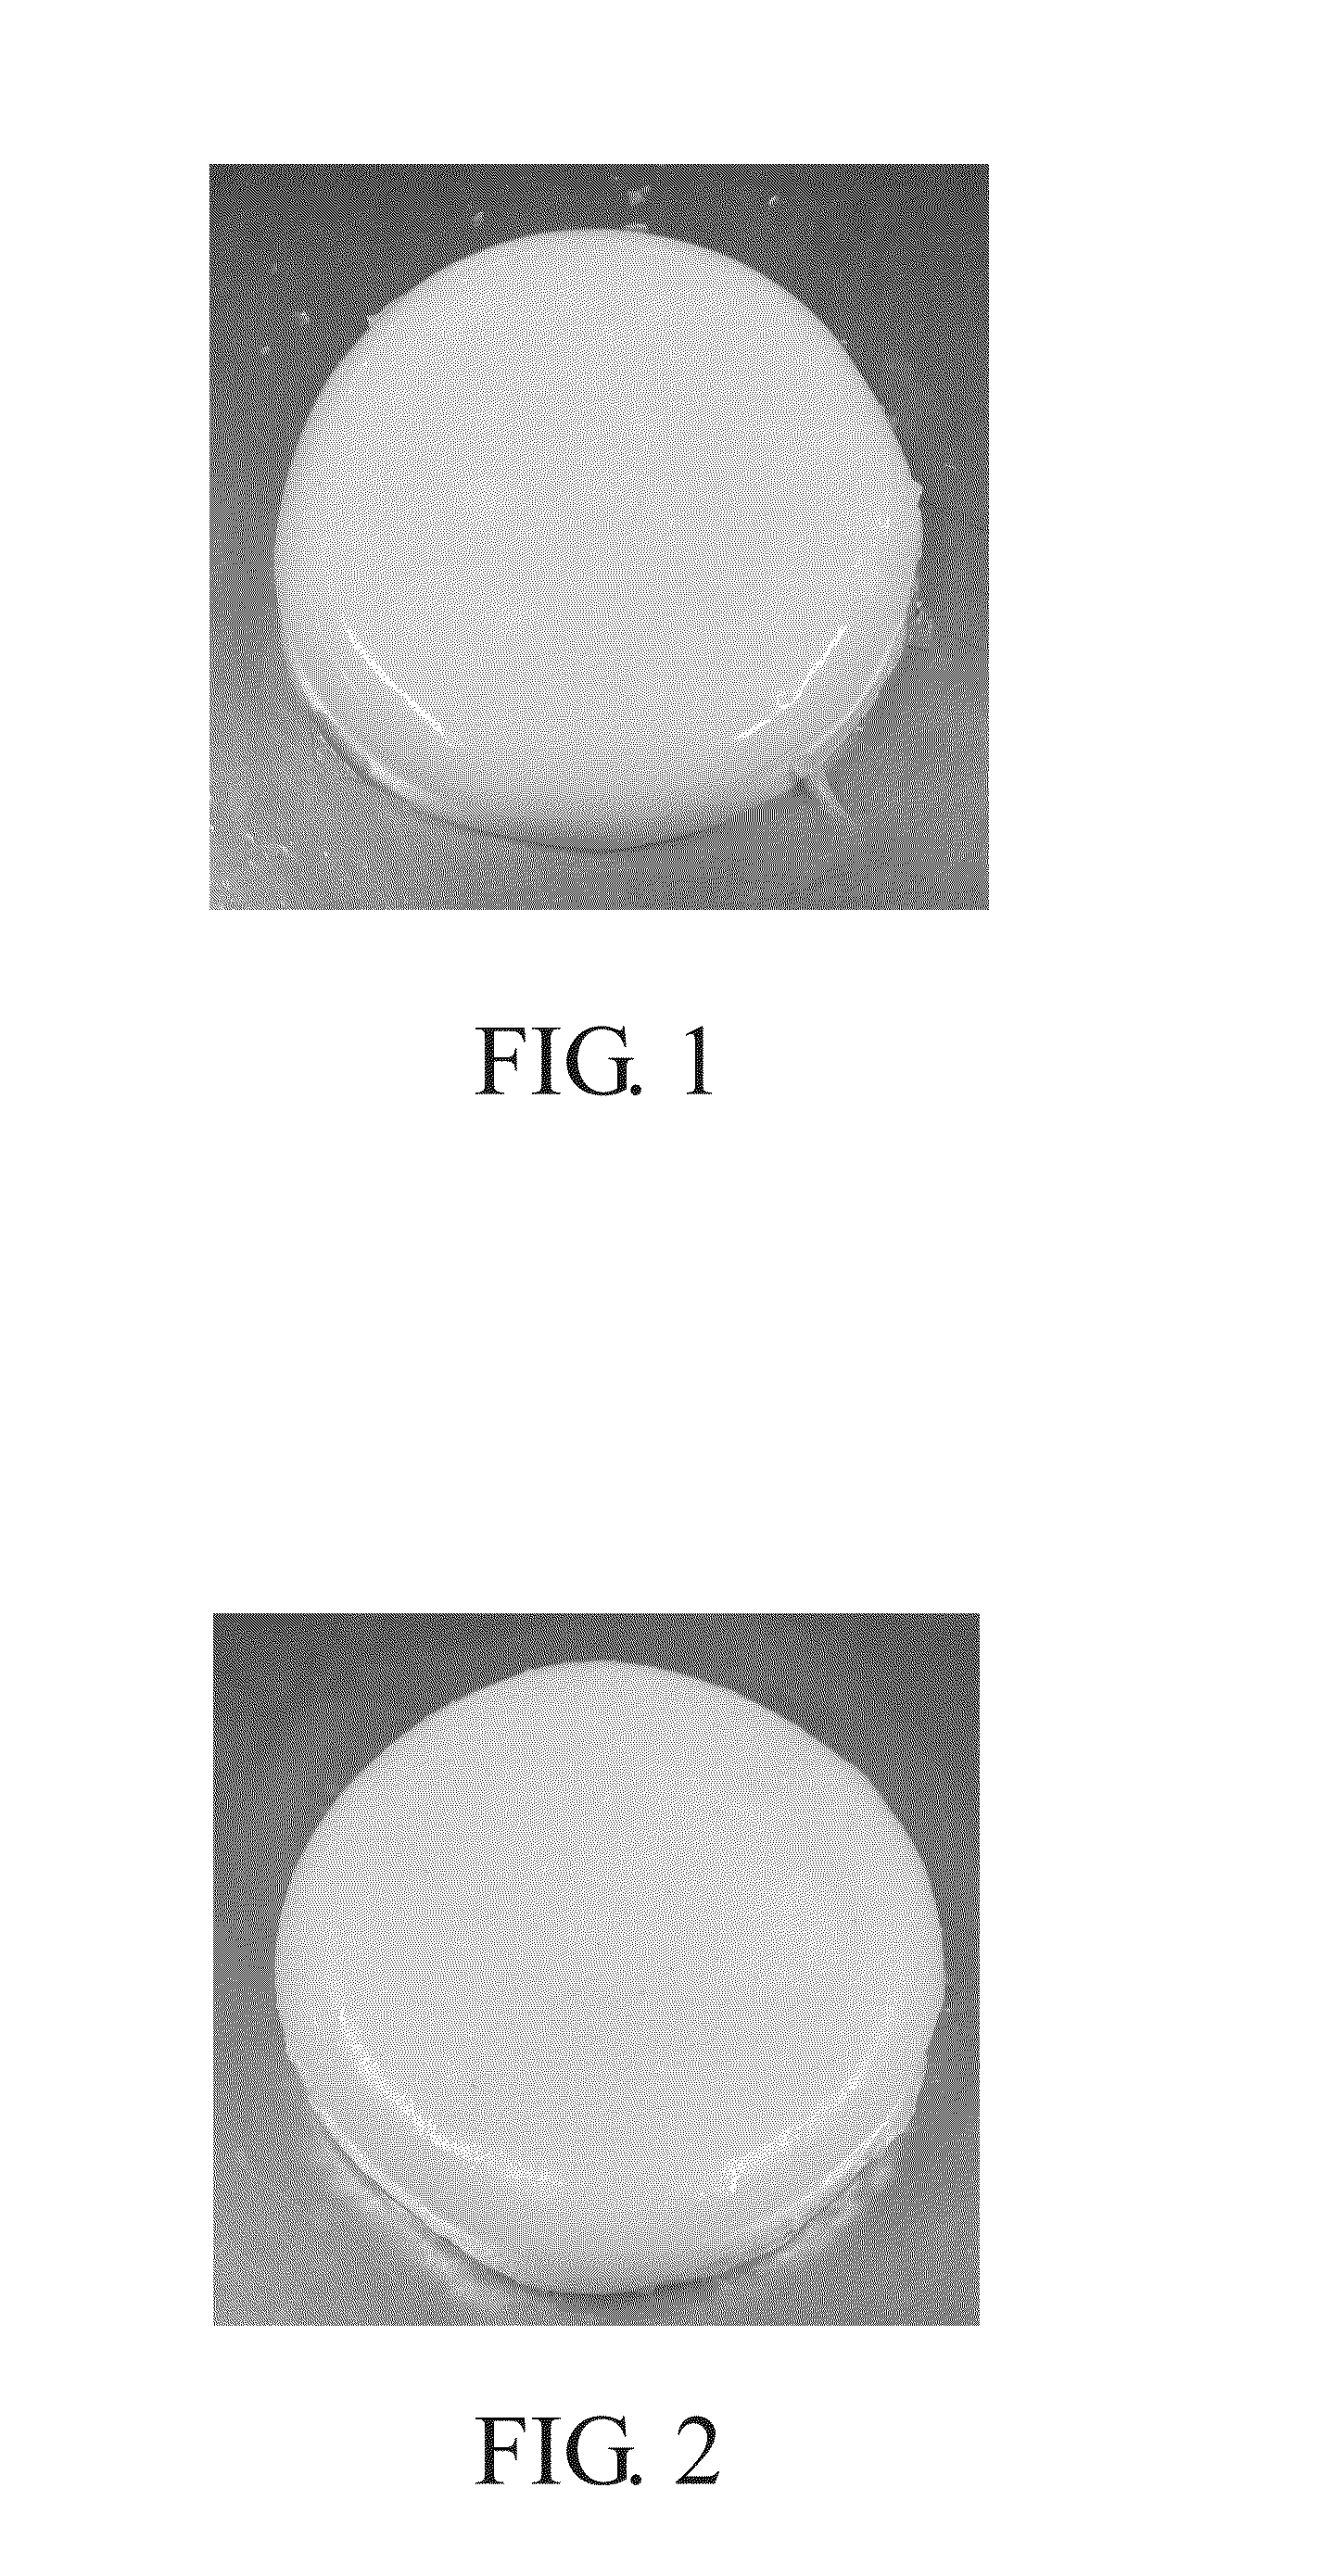 Subtitute for fat within meat and the forming method thereof